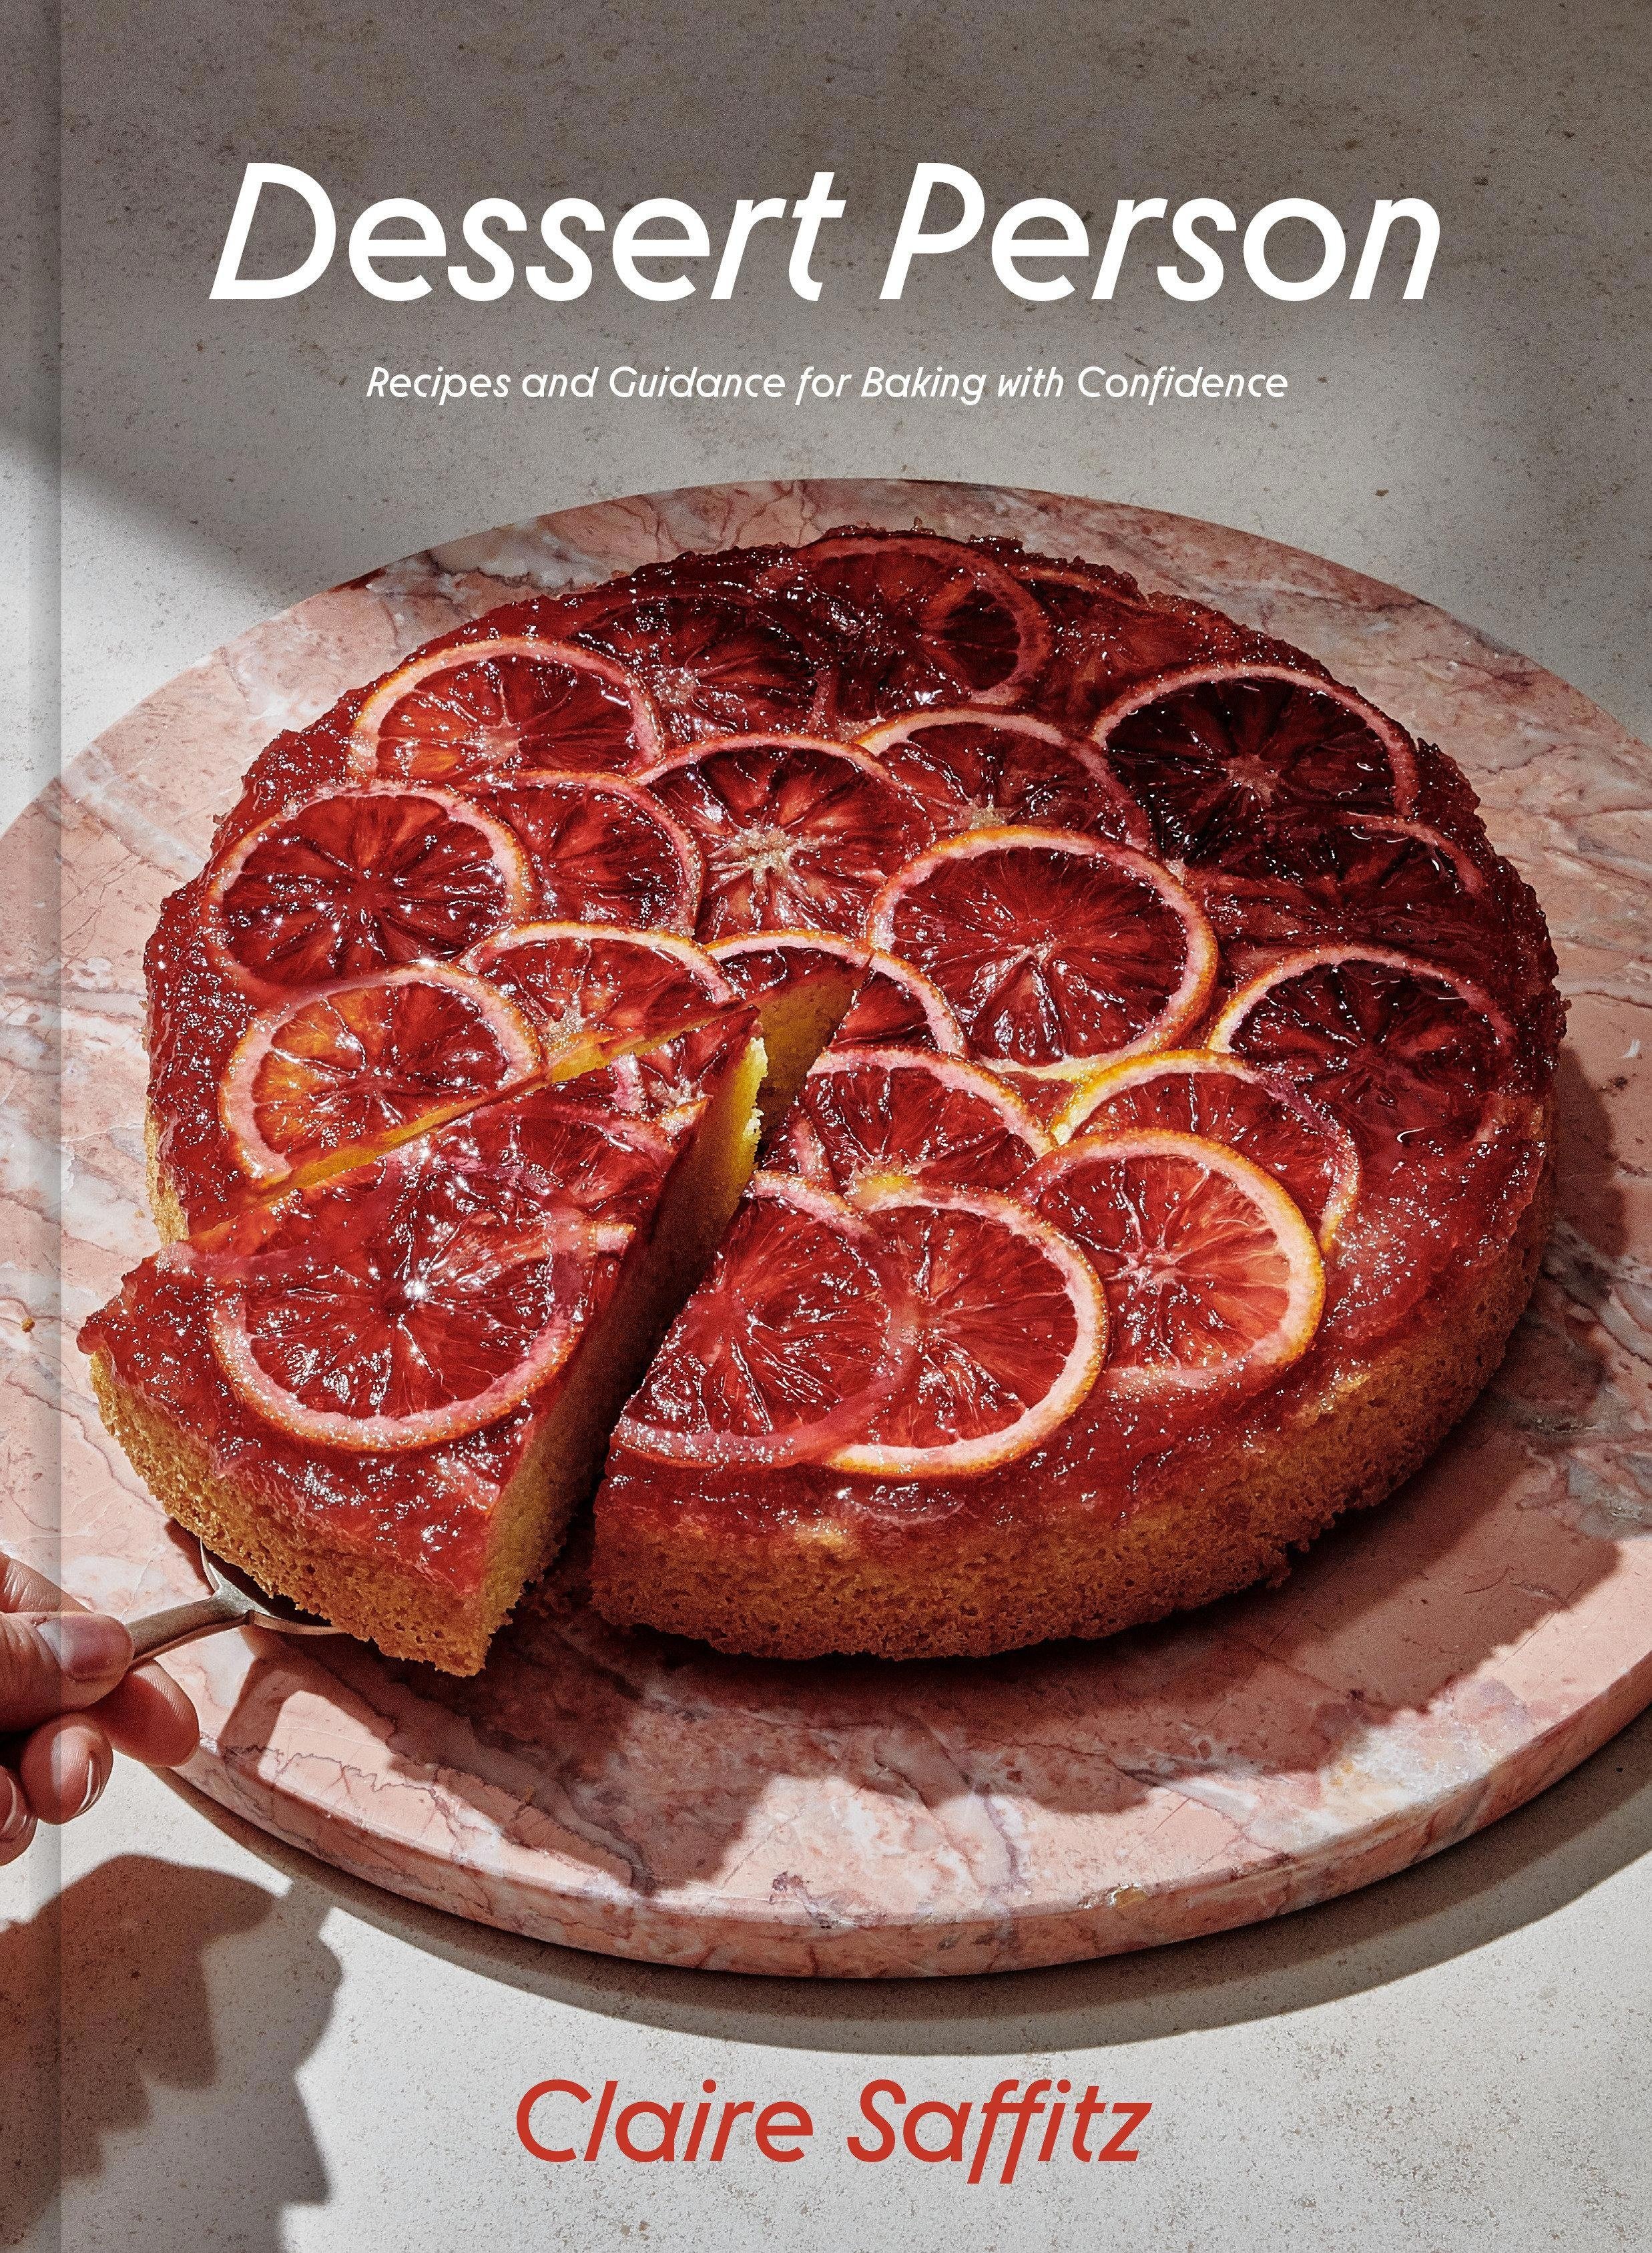 Dessert Person: Recipes and Guidance for Baking with Confidence, Ratgeber von Claire Saffitz